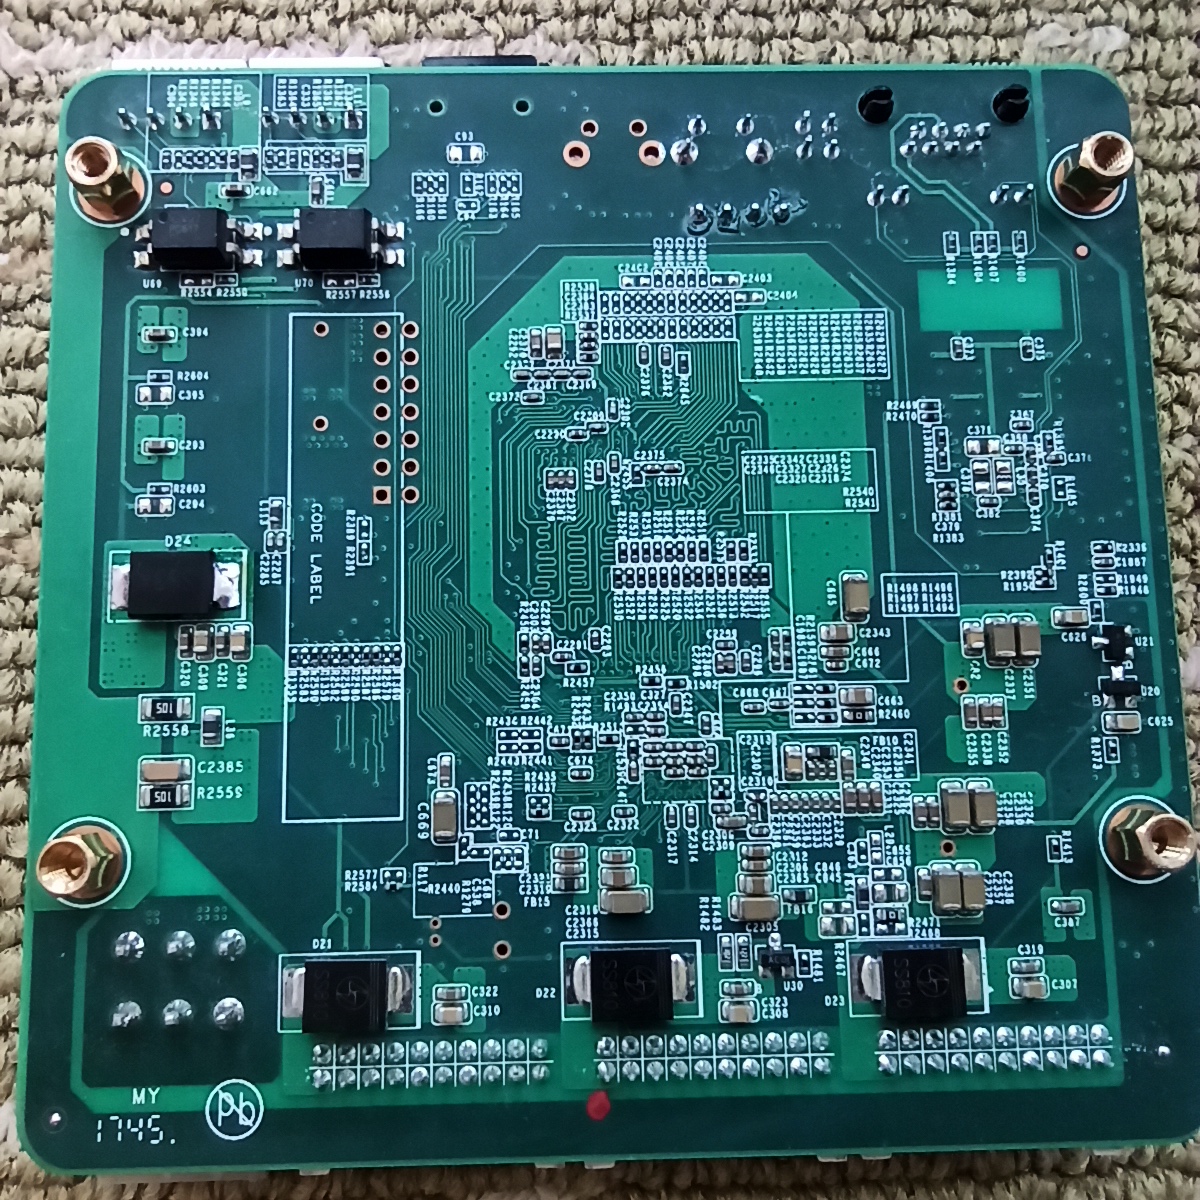 Bottom layer of the board